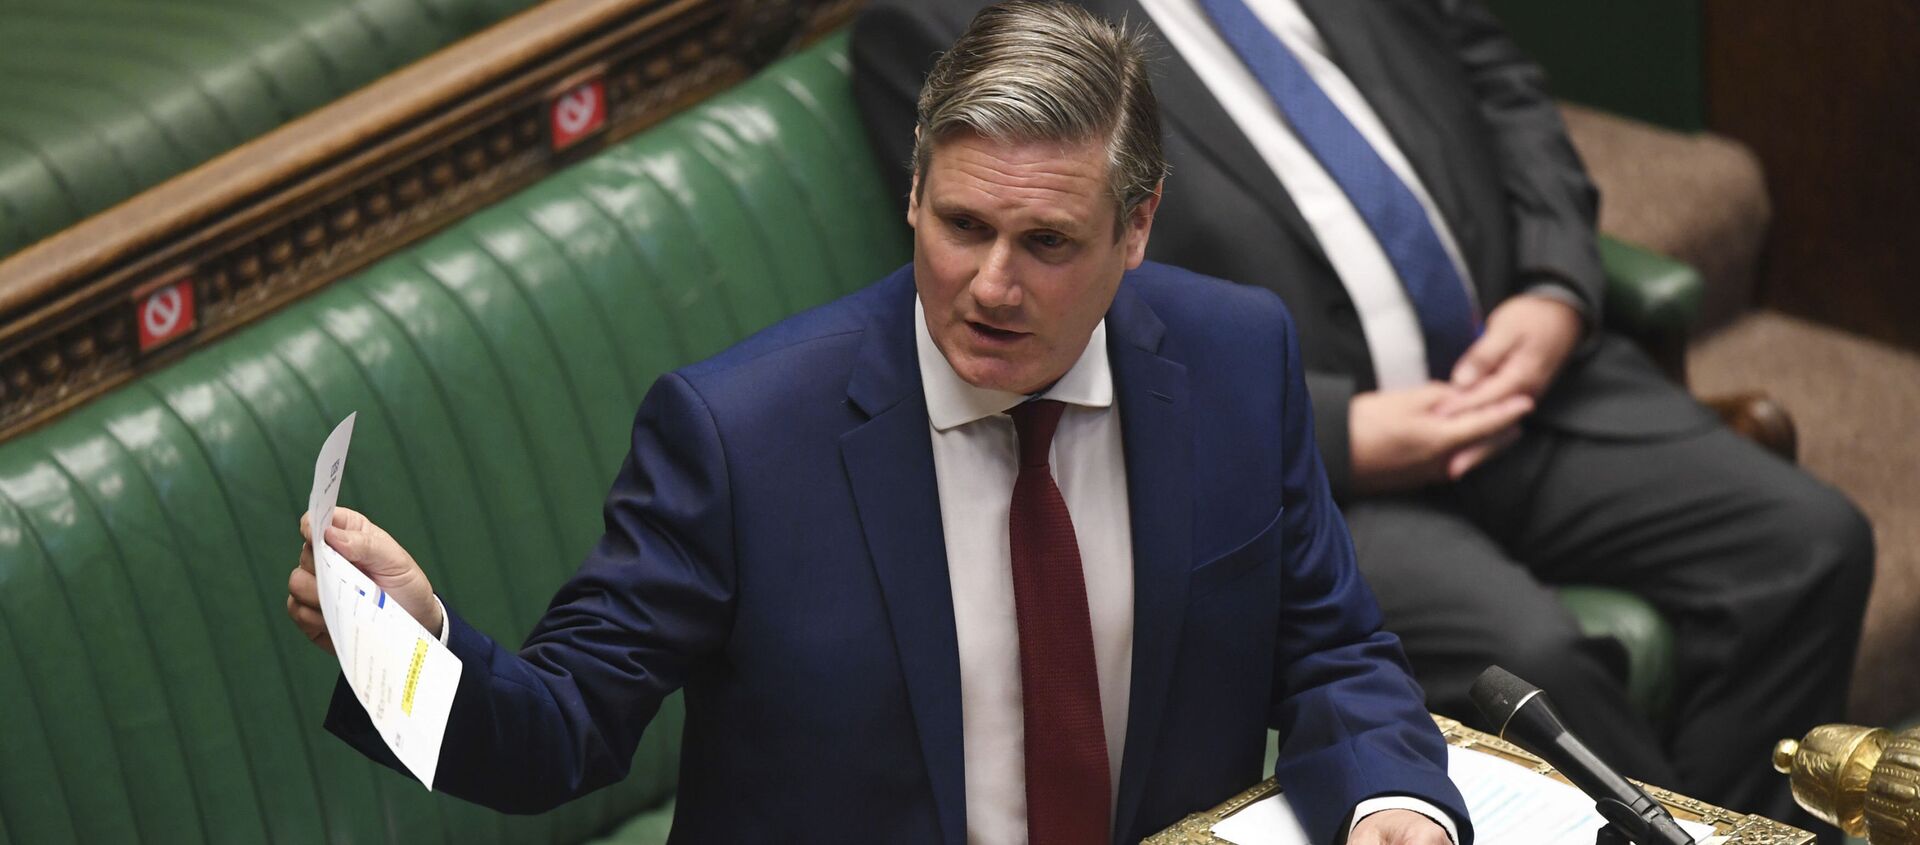 In this handout photo provided by UK Parliament, Britain's Labour leader Keir Starmer speaks during Prime Minister's Questions in the House of Commons, London, Wednesday, June 24, 2020. - Sputnik International, 1920, 21.03.2021